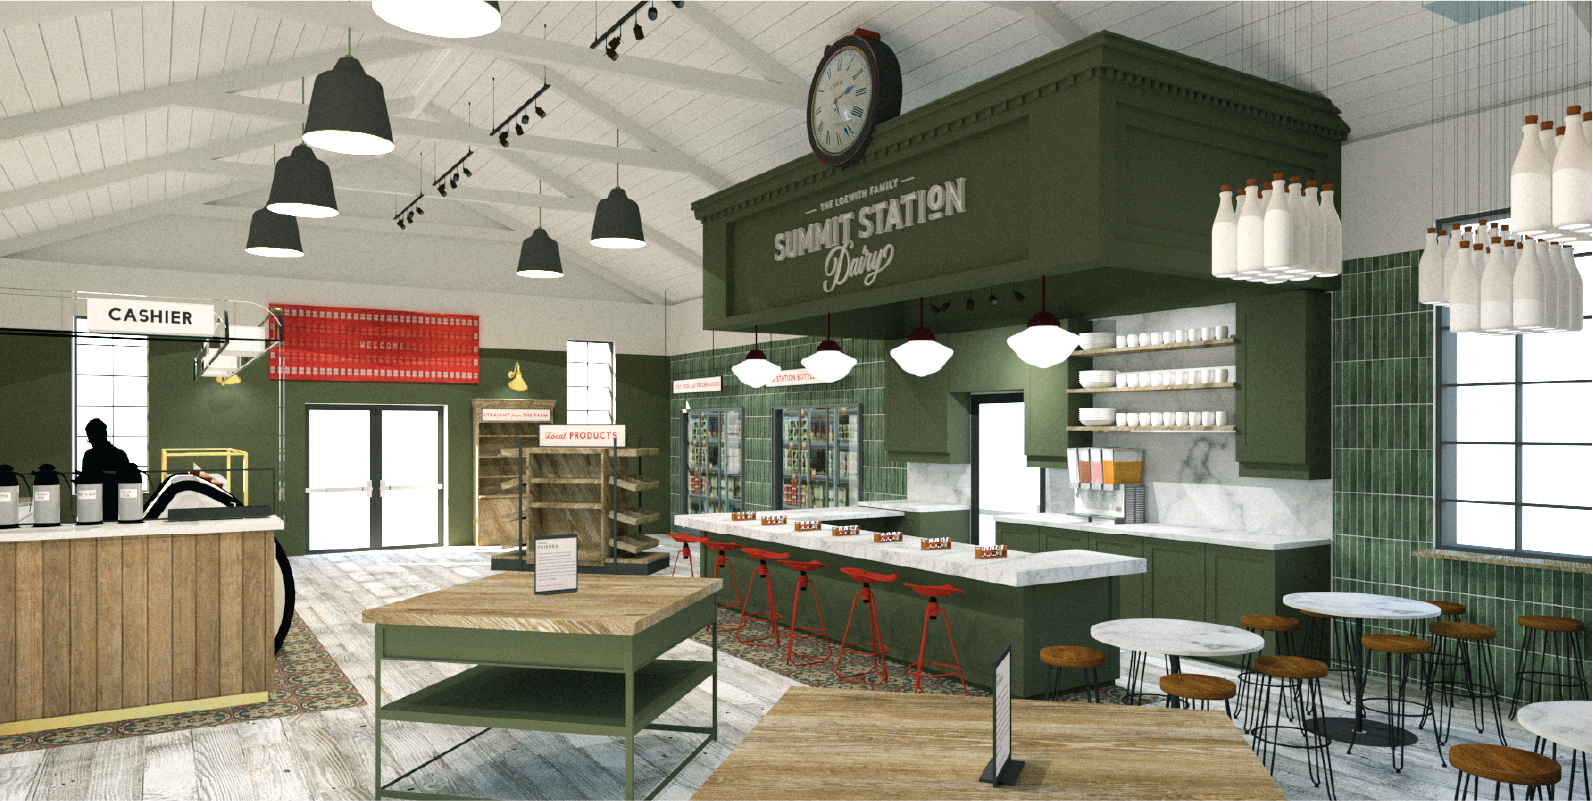 Rendering of the on-farm store at Summit Station Dairy & Creamery